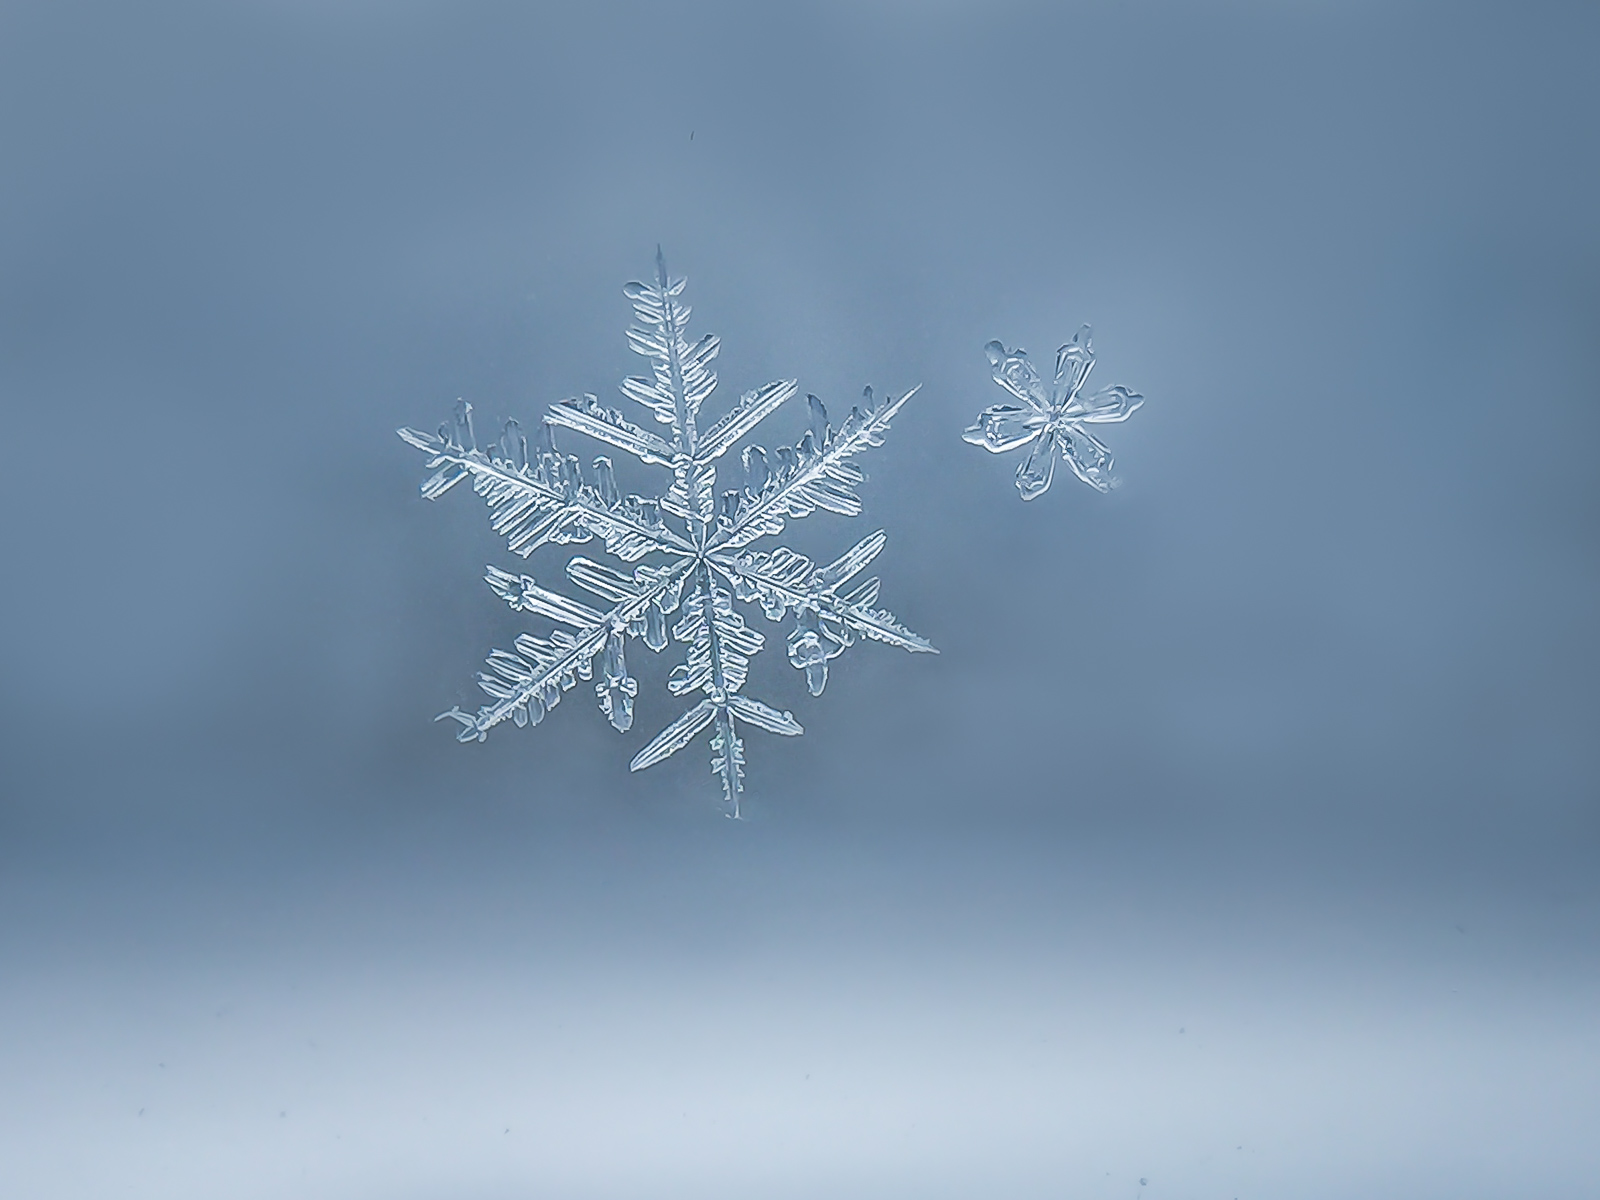 How to take macro pictures of beautiful snowflakes